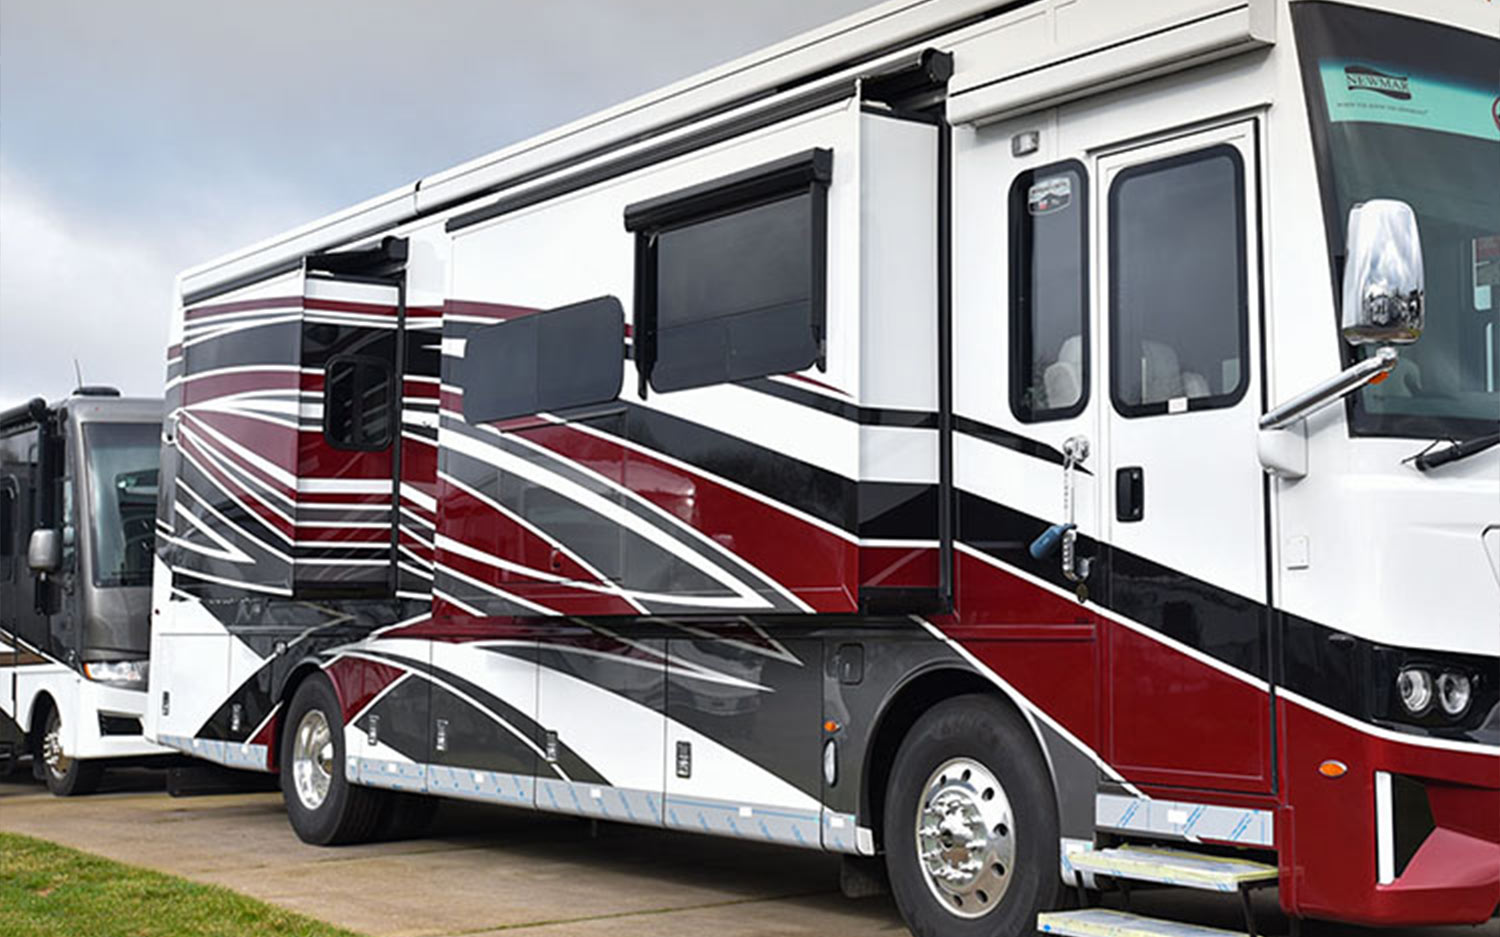 3/4ths view of a white, red and black RV with two sliderooms